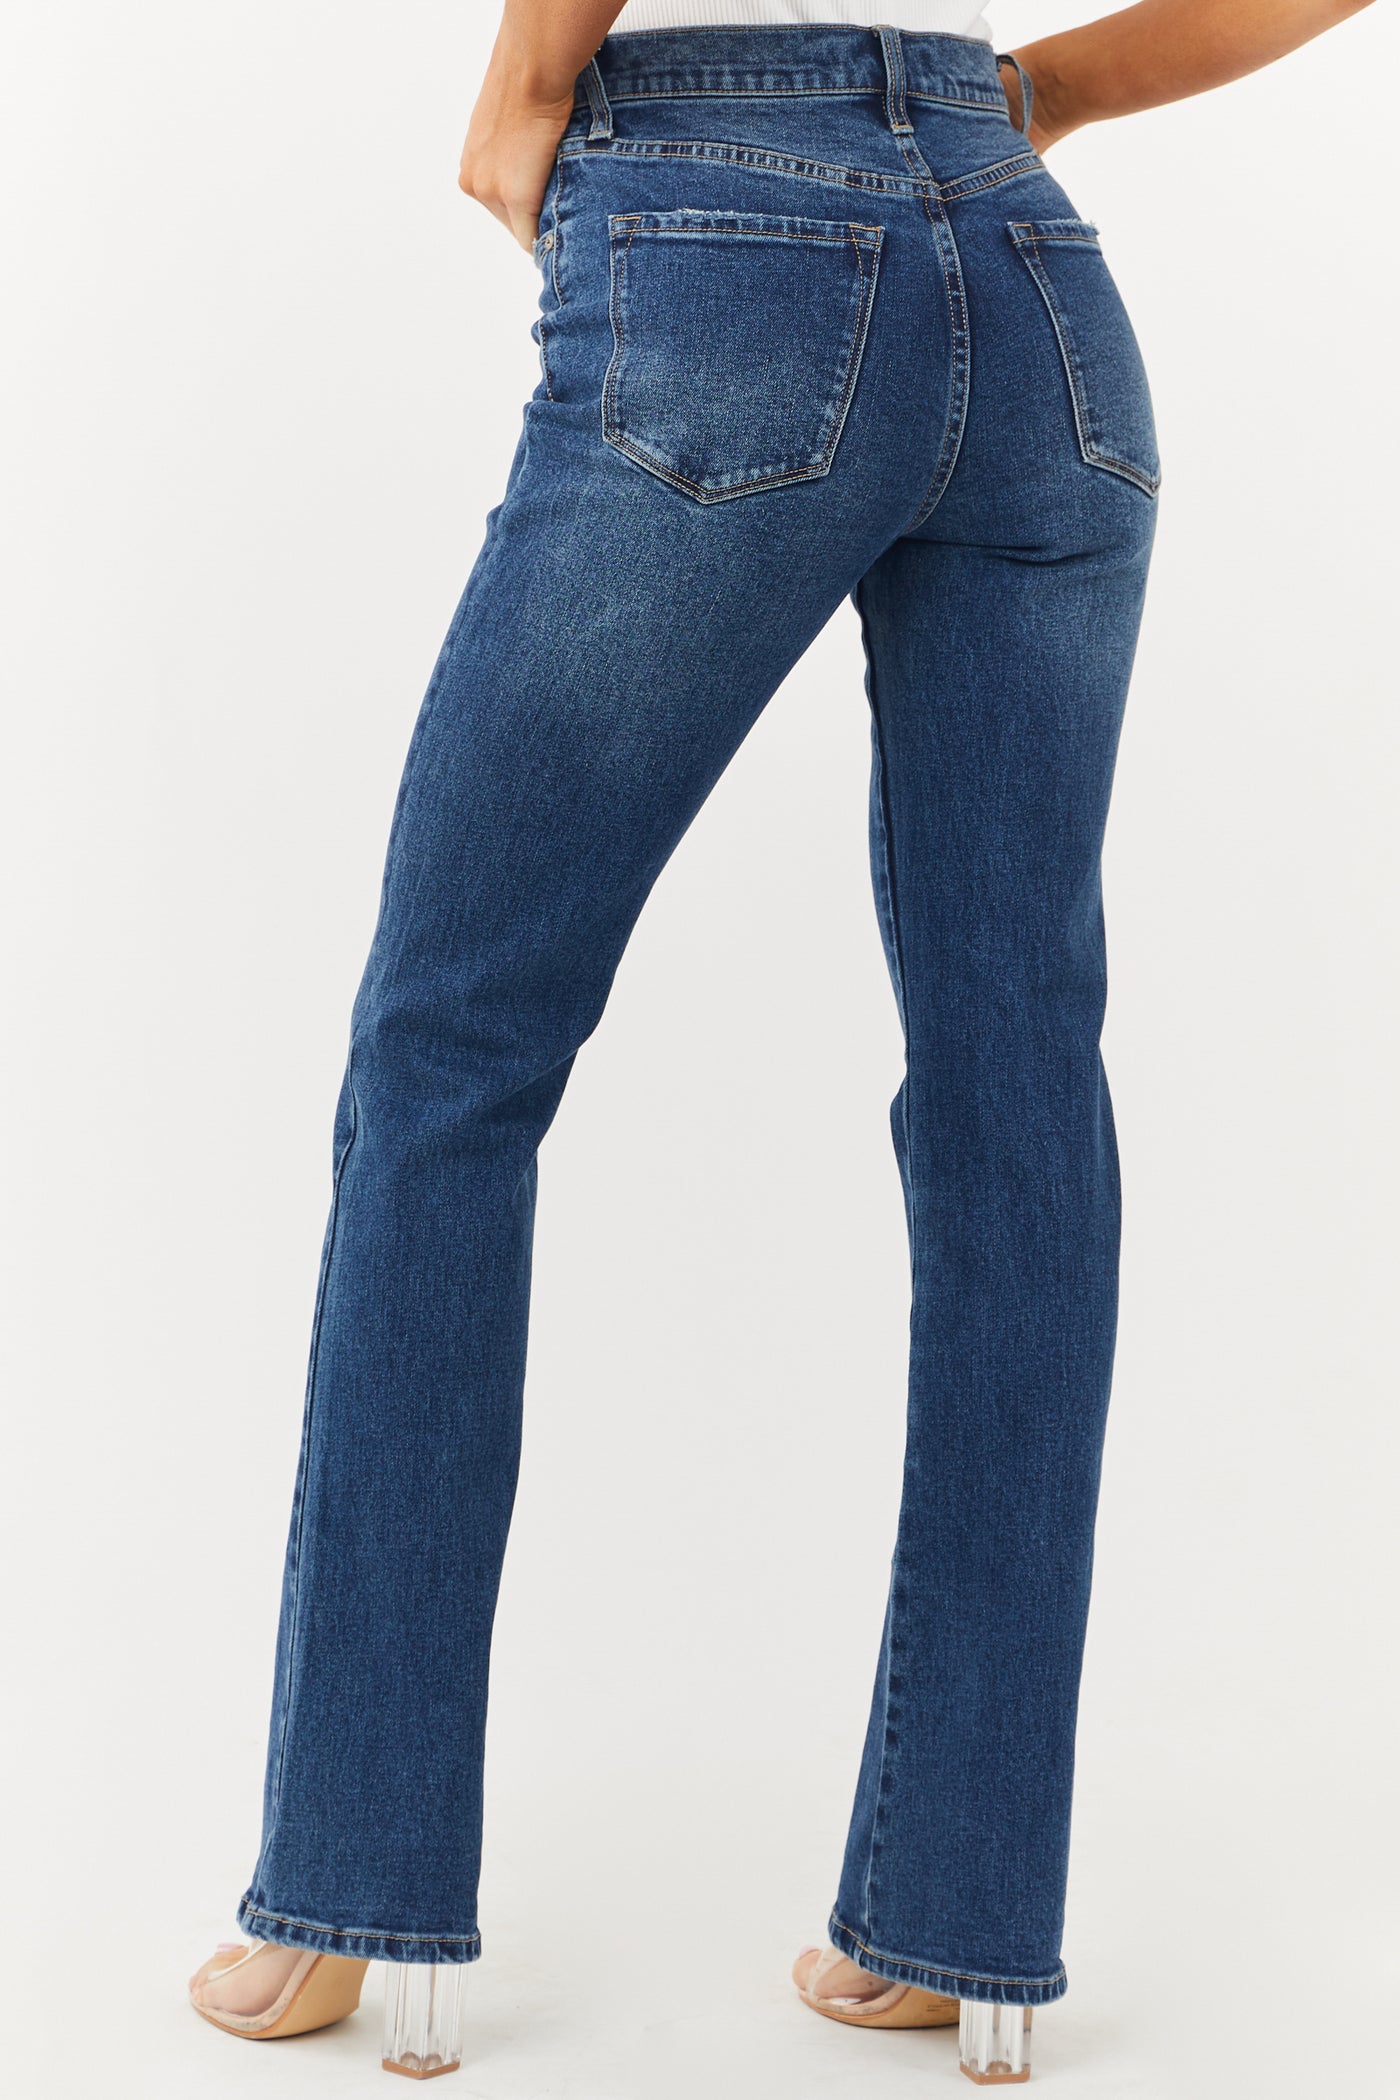 KanCan Vintage Dark High Rise Button Fly Bootcut Jeans | Lime Lush